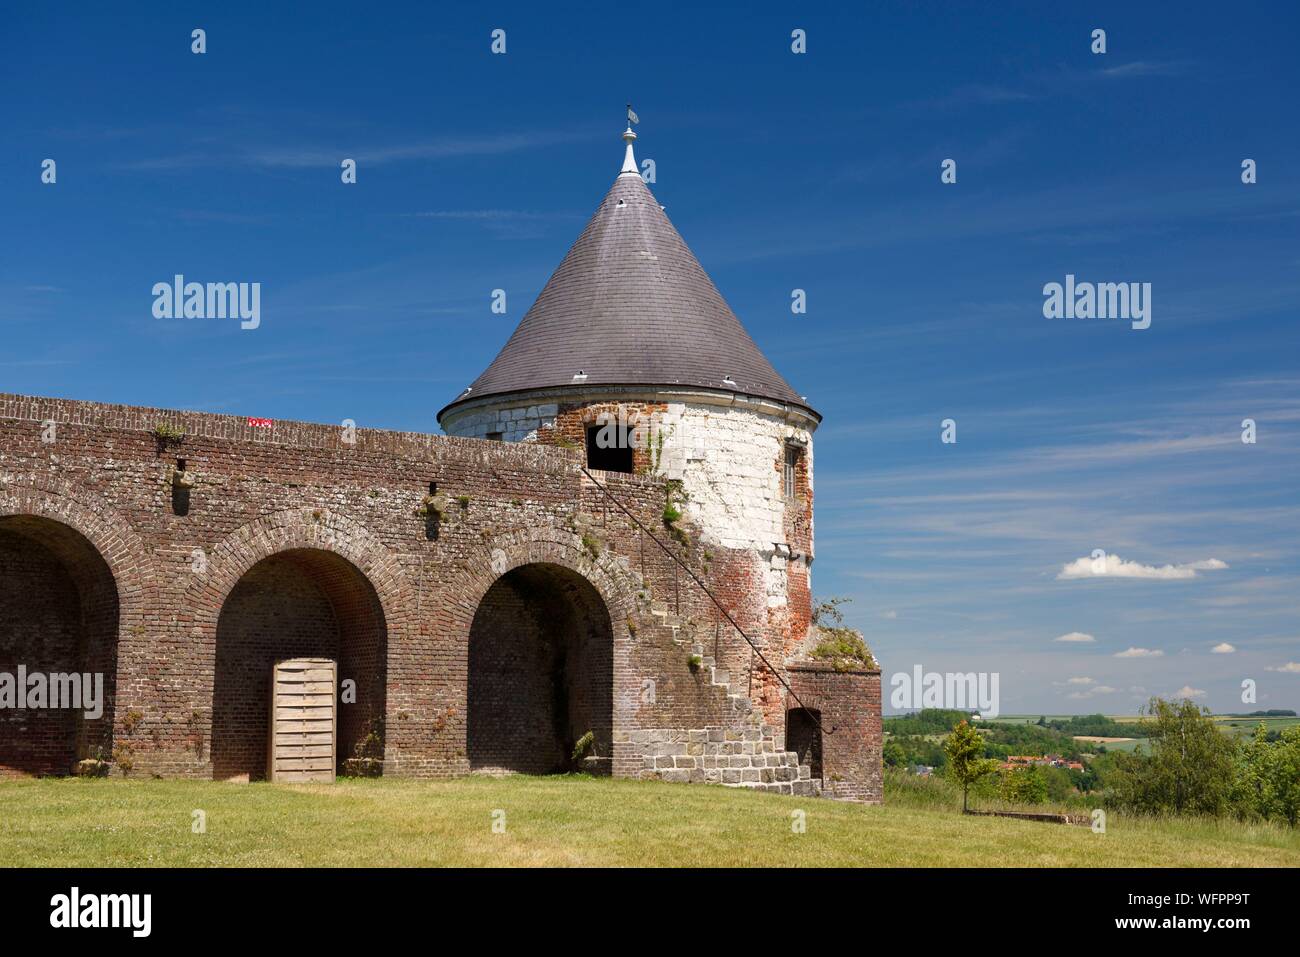 France, Pas de Calais, Montreuil sur Mer, citadel built under Charles the 10th and perfected by Vauban, walkway and white tower Stock Photo